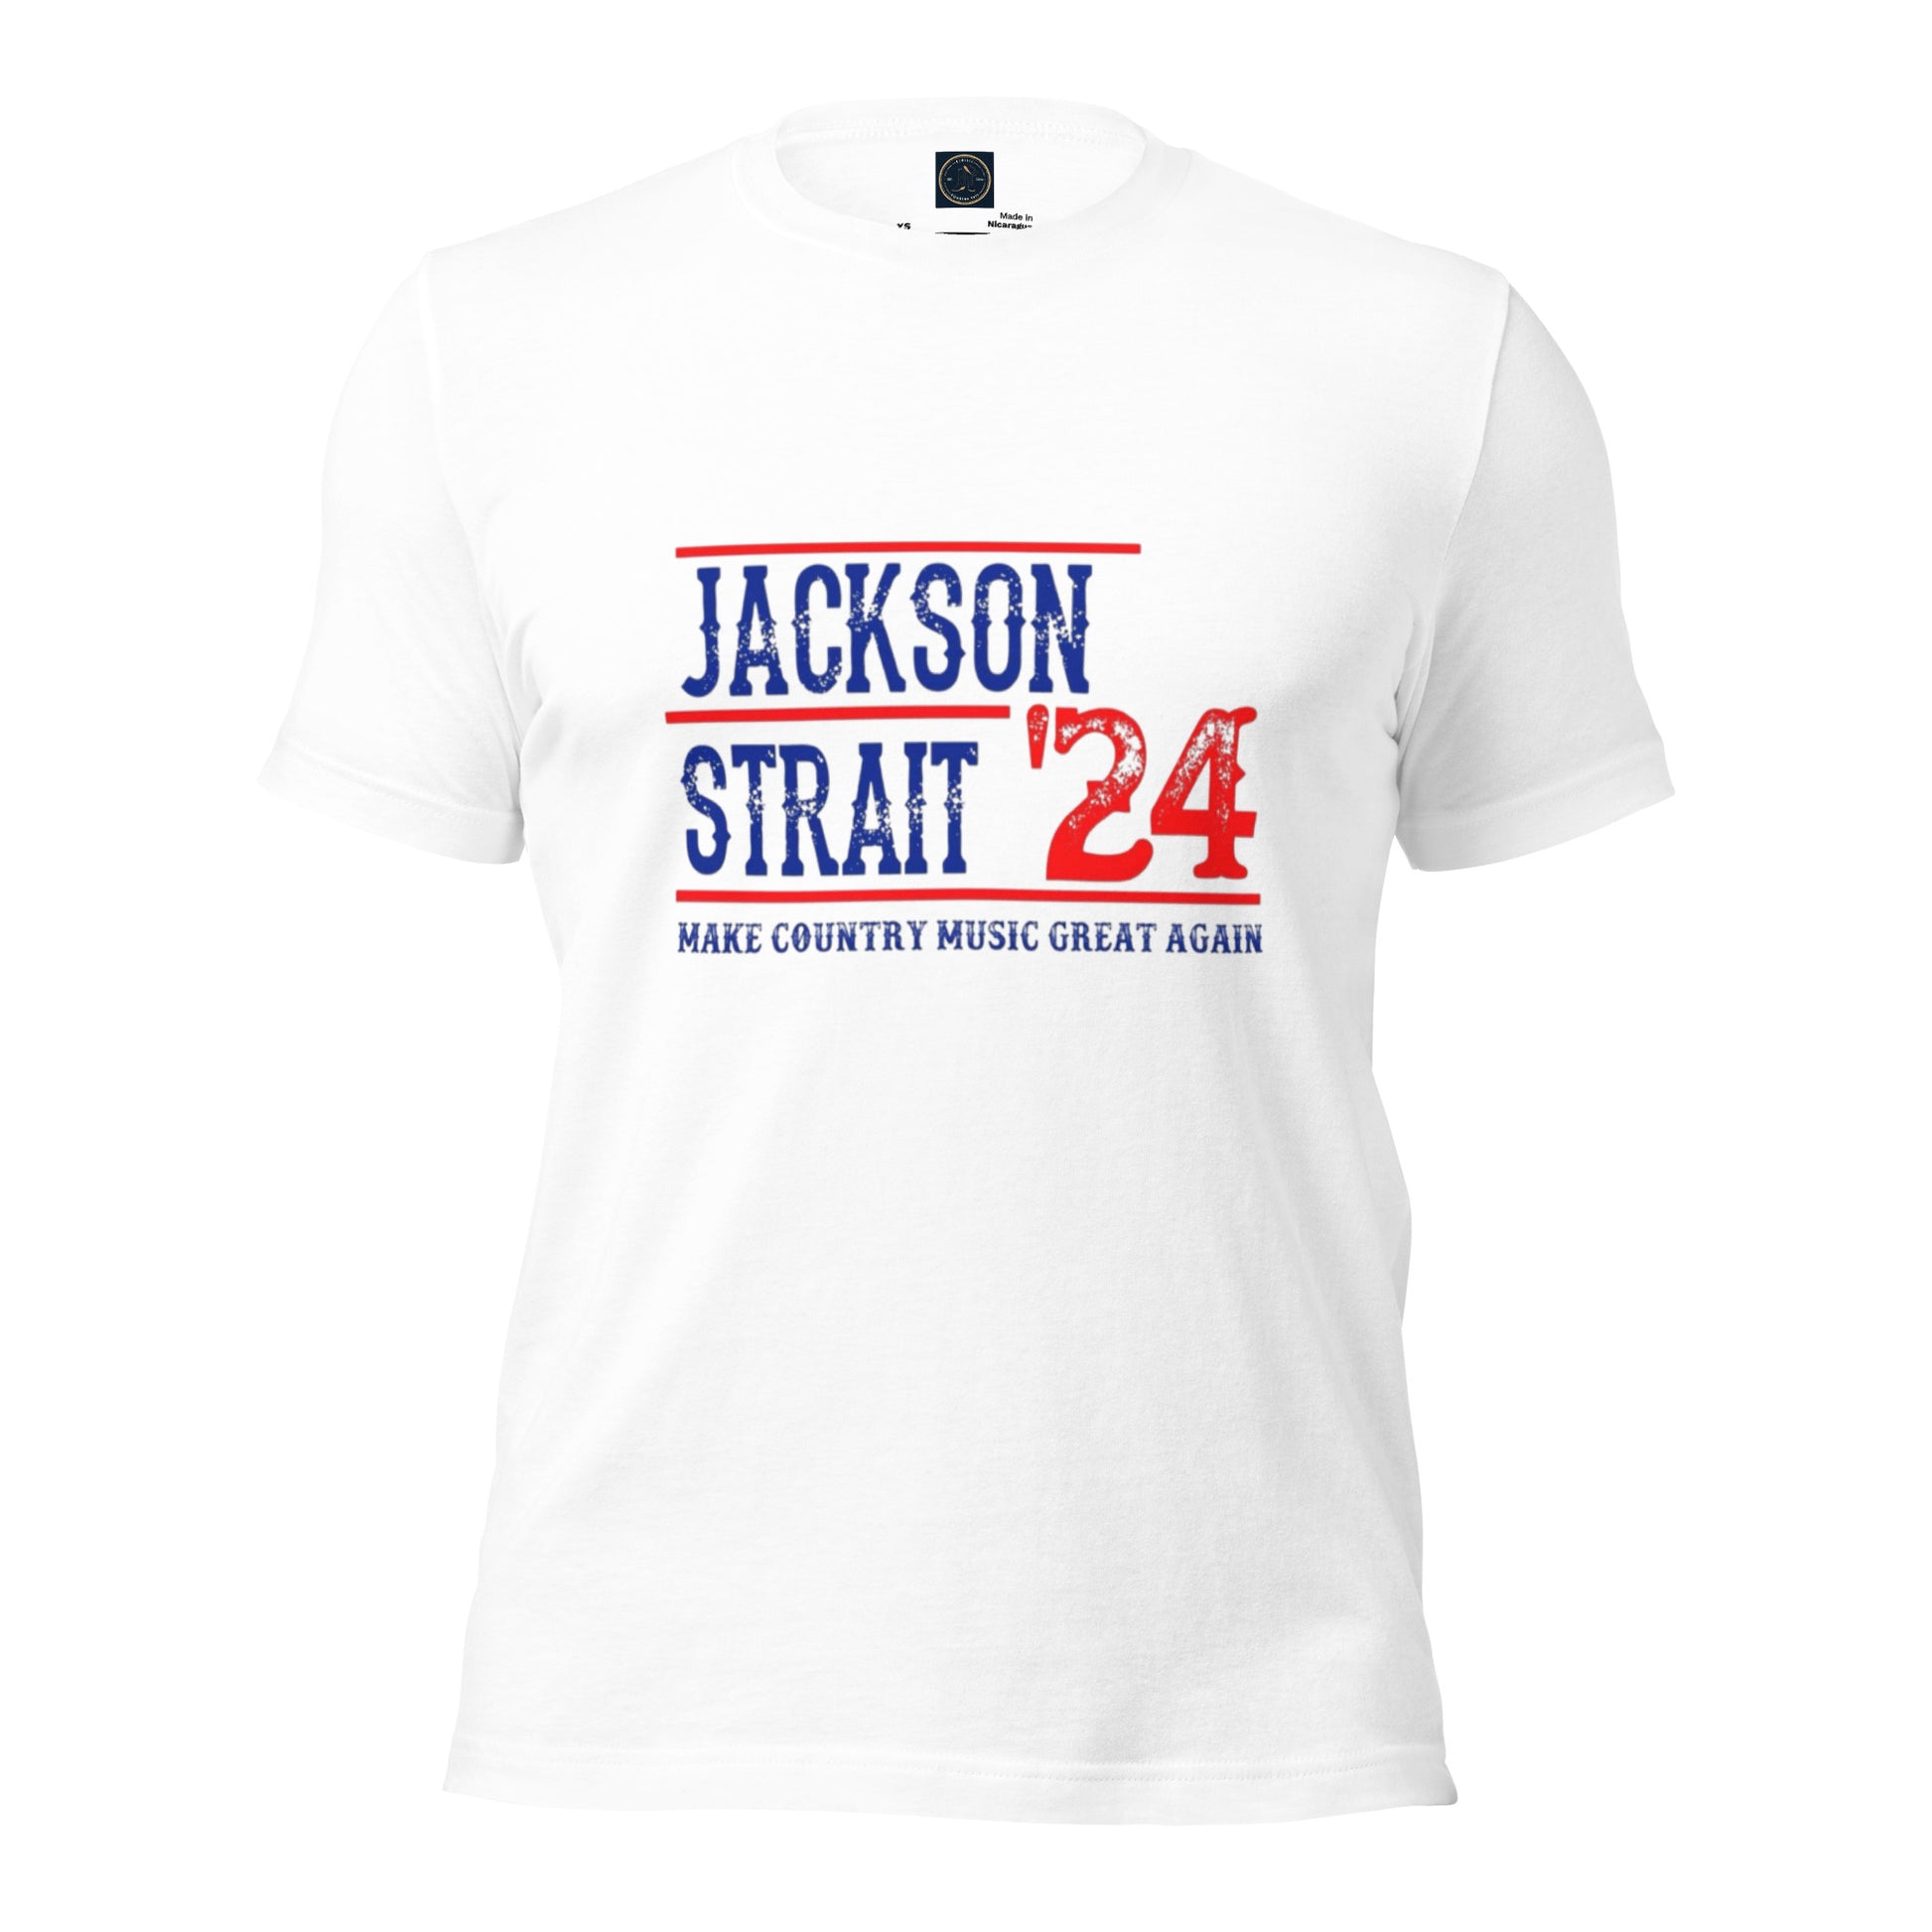 Jackson & Strait - Classic Country Tees